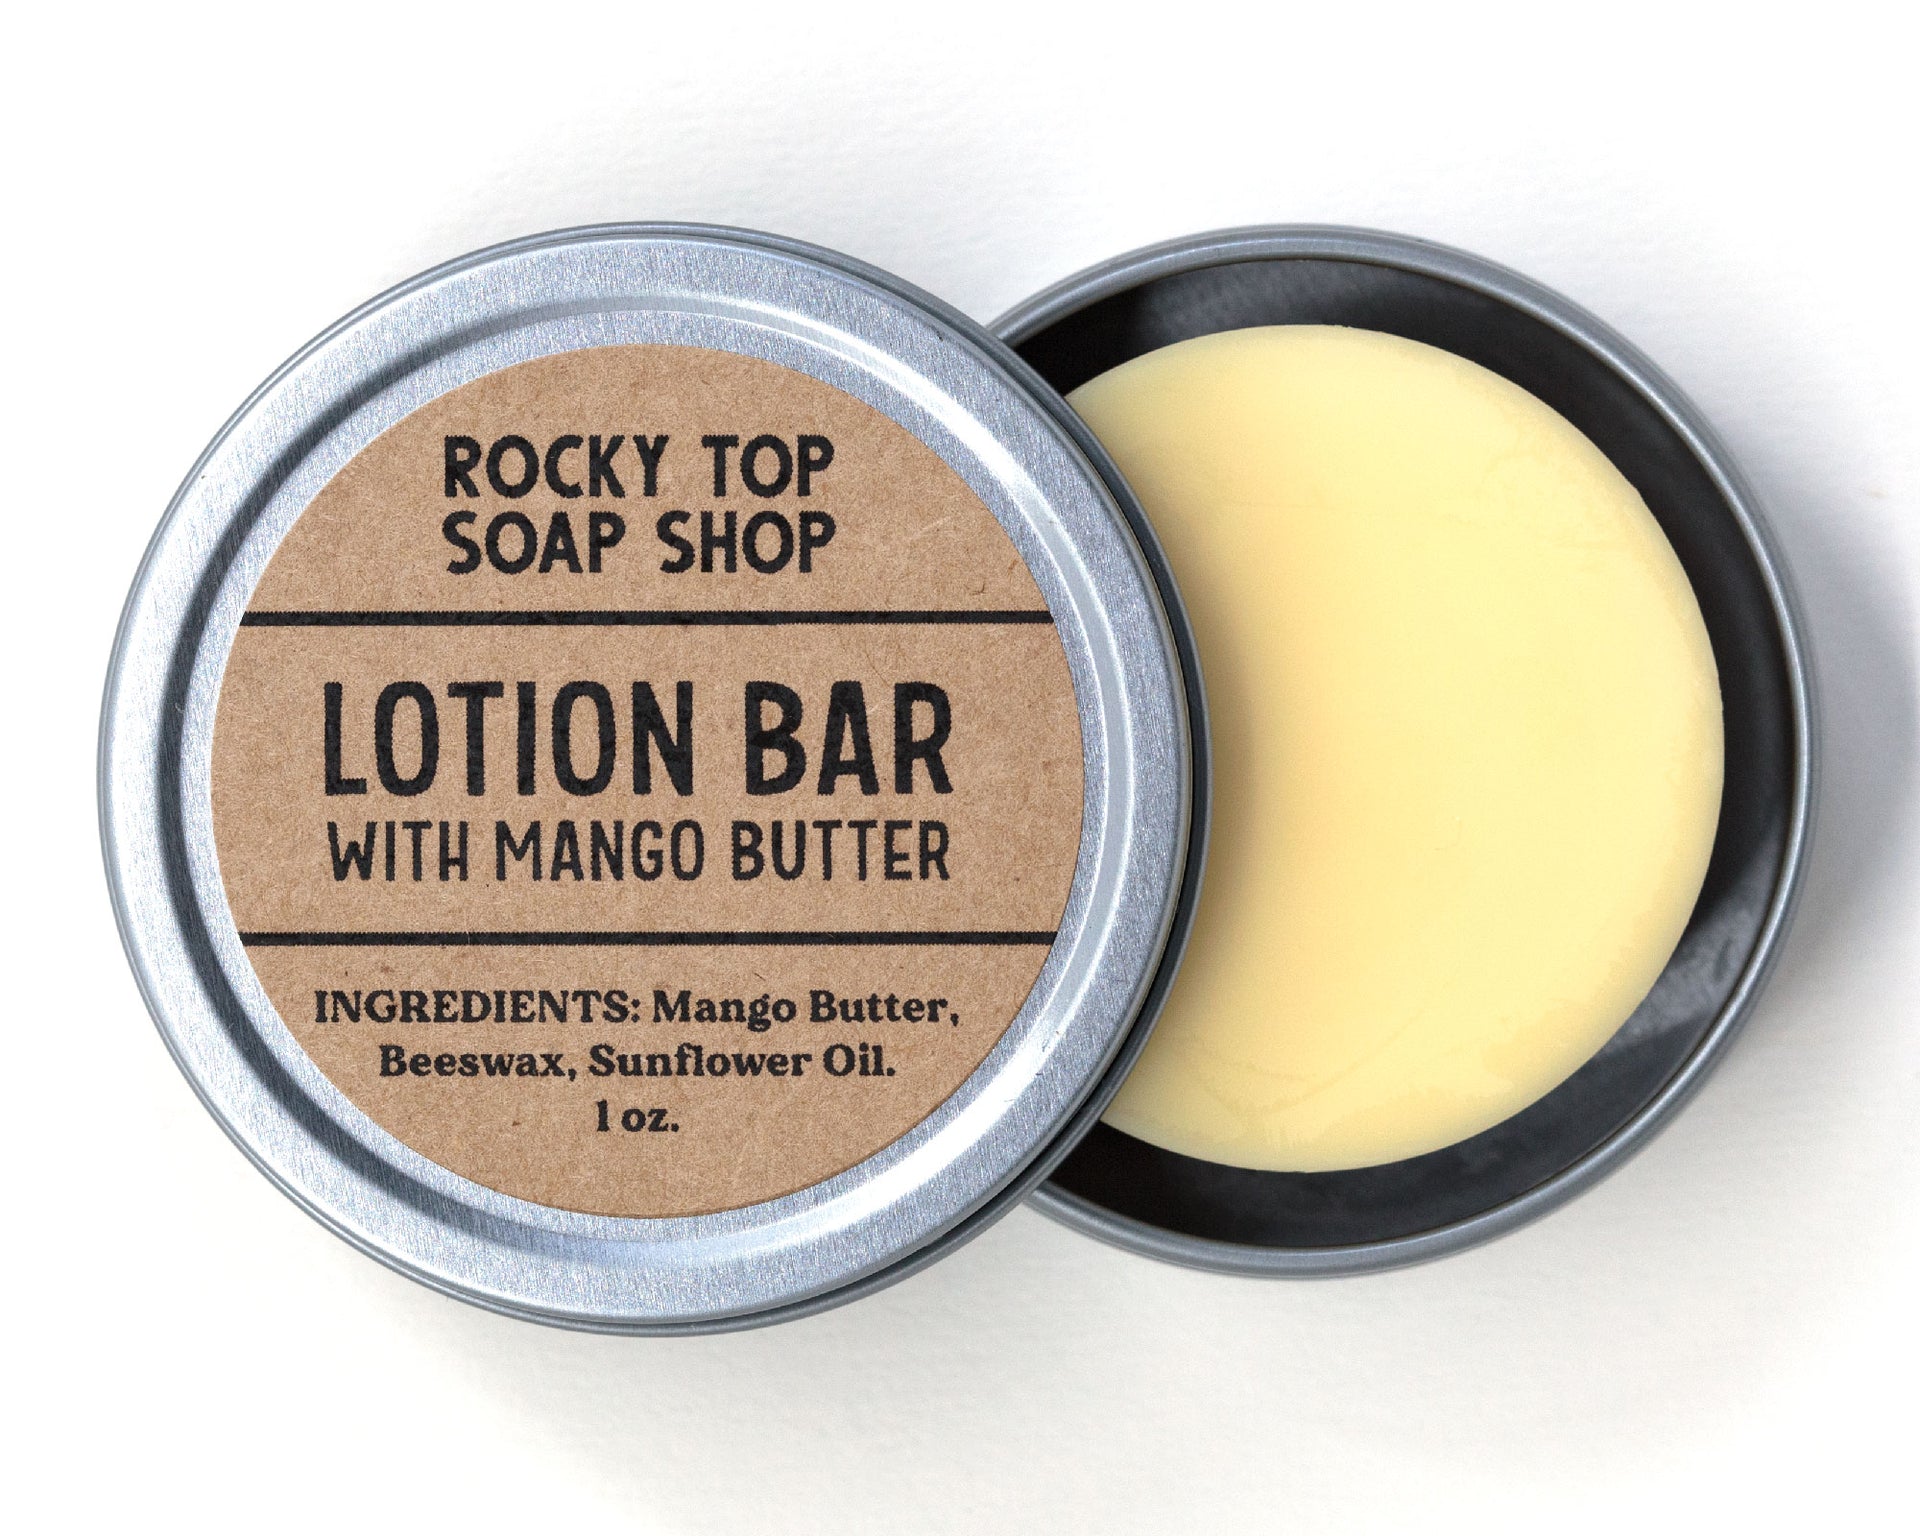 SOLID LOTION BAR - Great Body Bar for Travel & Massage. Citrus eo Blend,  Organic Coconut Oil, Shea, Mango Butter and Essential Oils